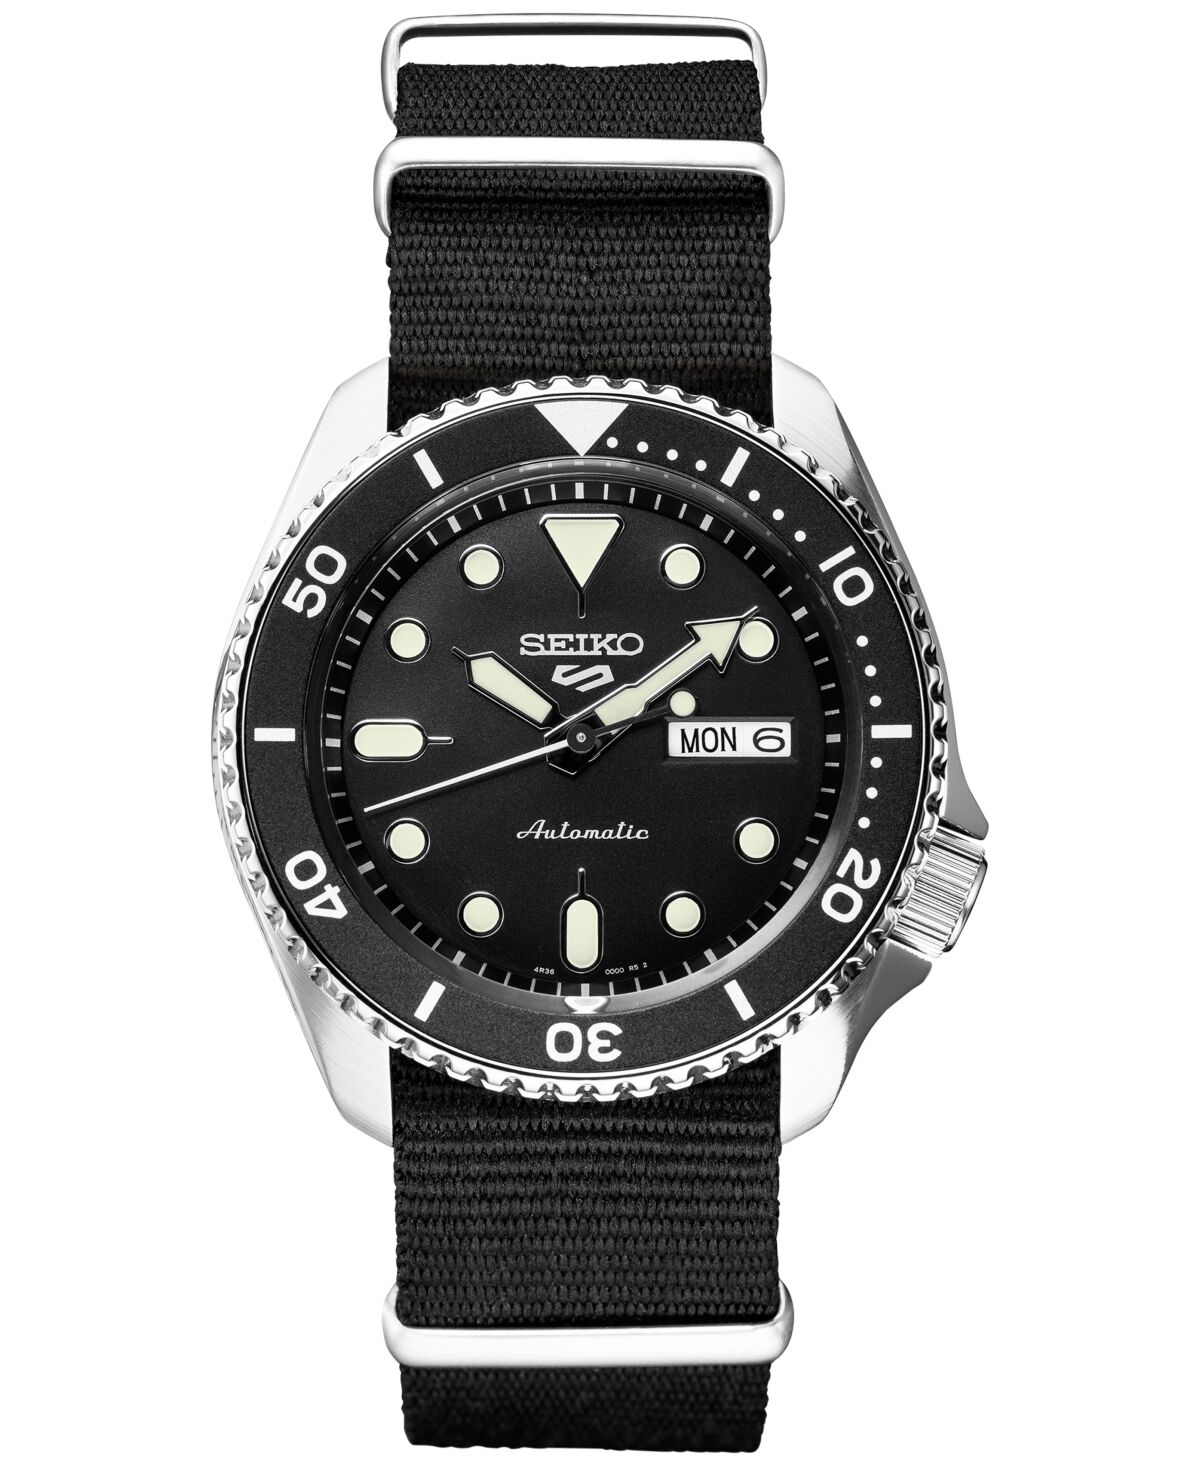 Seiko Limited Edition Seiko Men's Automatic 5 Sports Black Nylon Strap Watch 42.5mm, Created for Macy's - Black